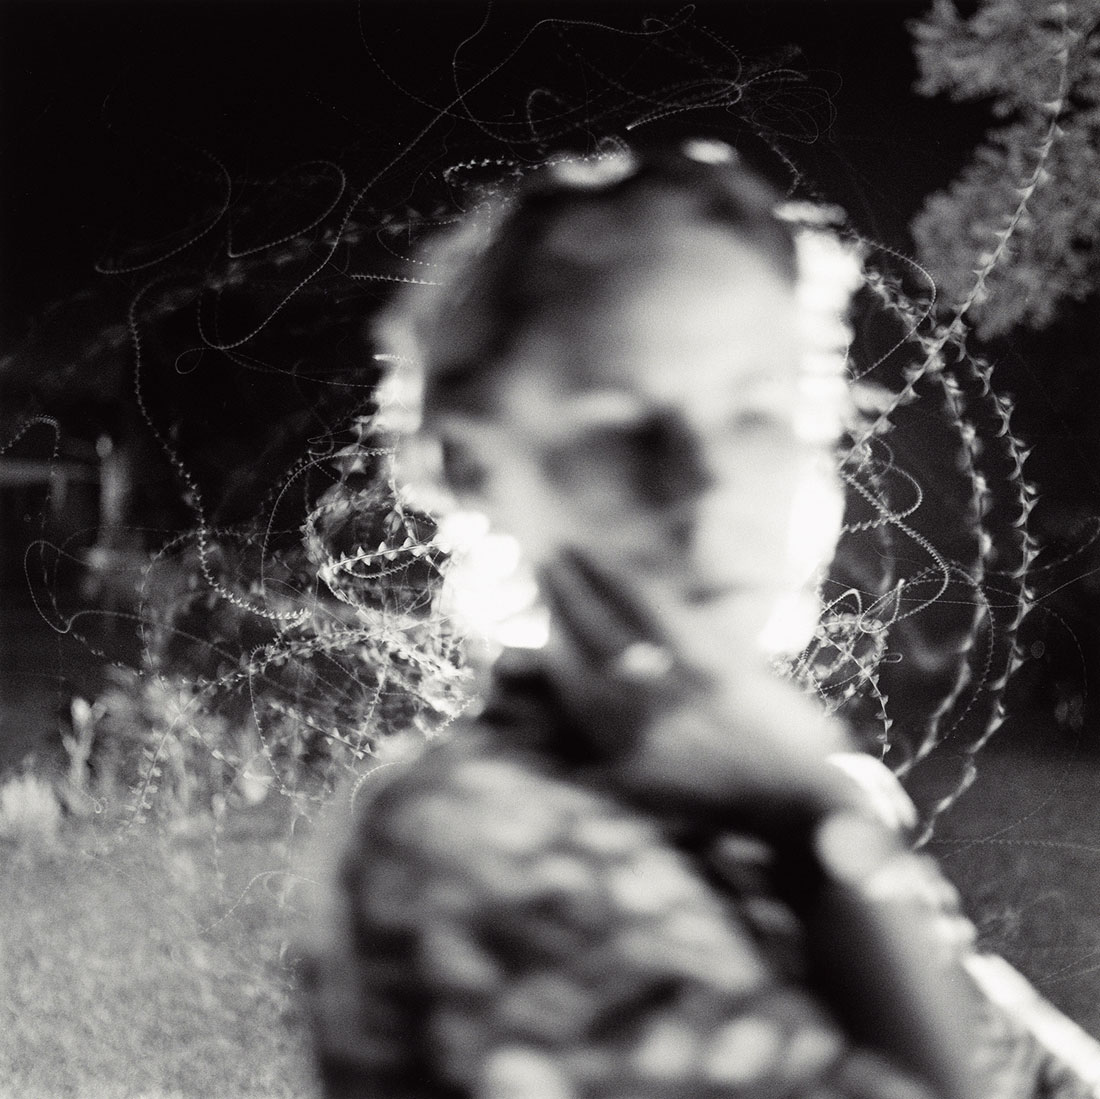 Photo Edith and moth flight by Emmet Gowin